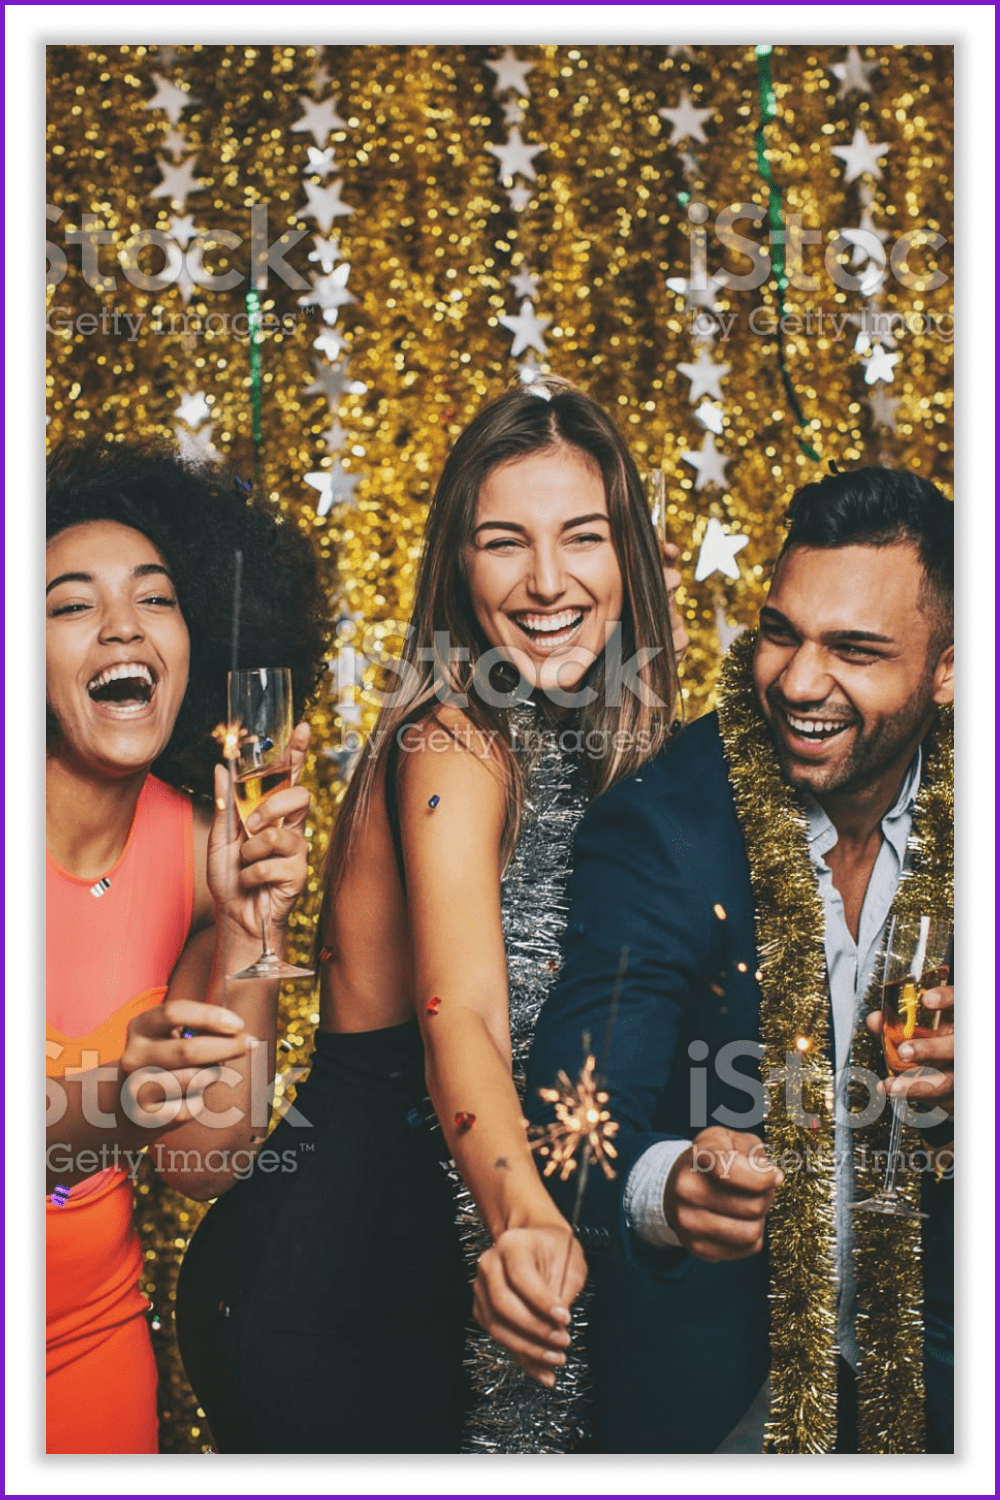 Two women and a man in New Year's decorations smile and laugh.